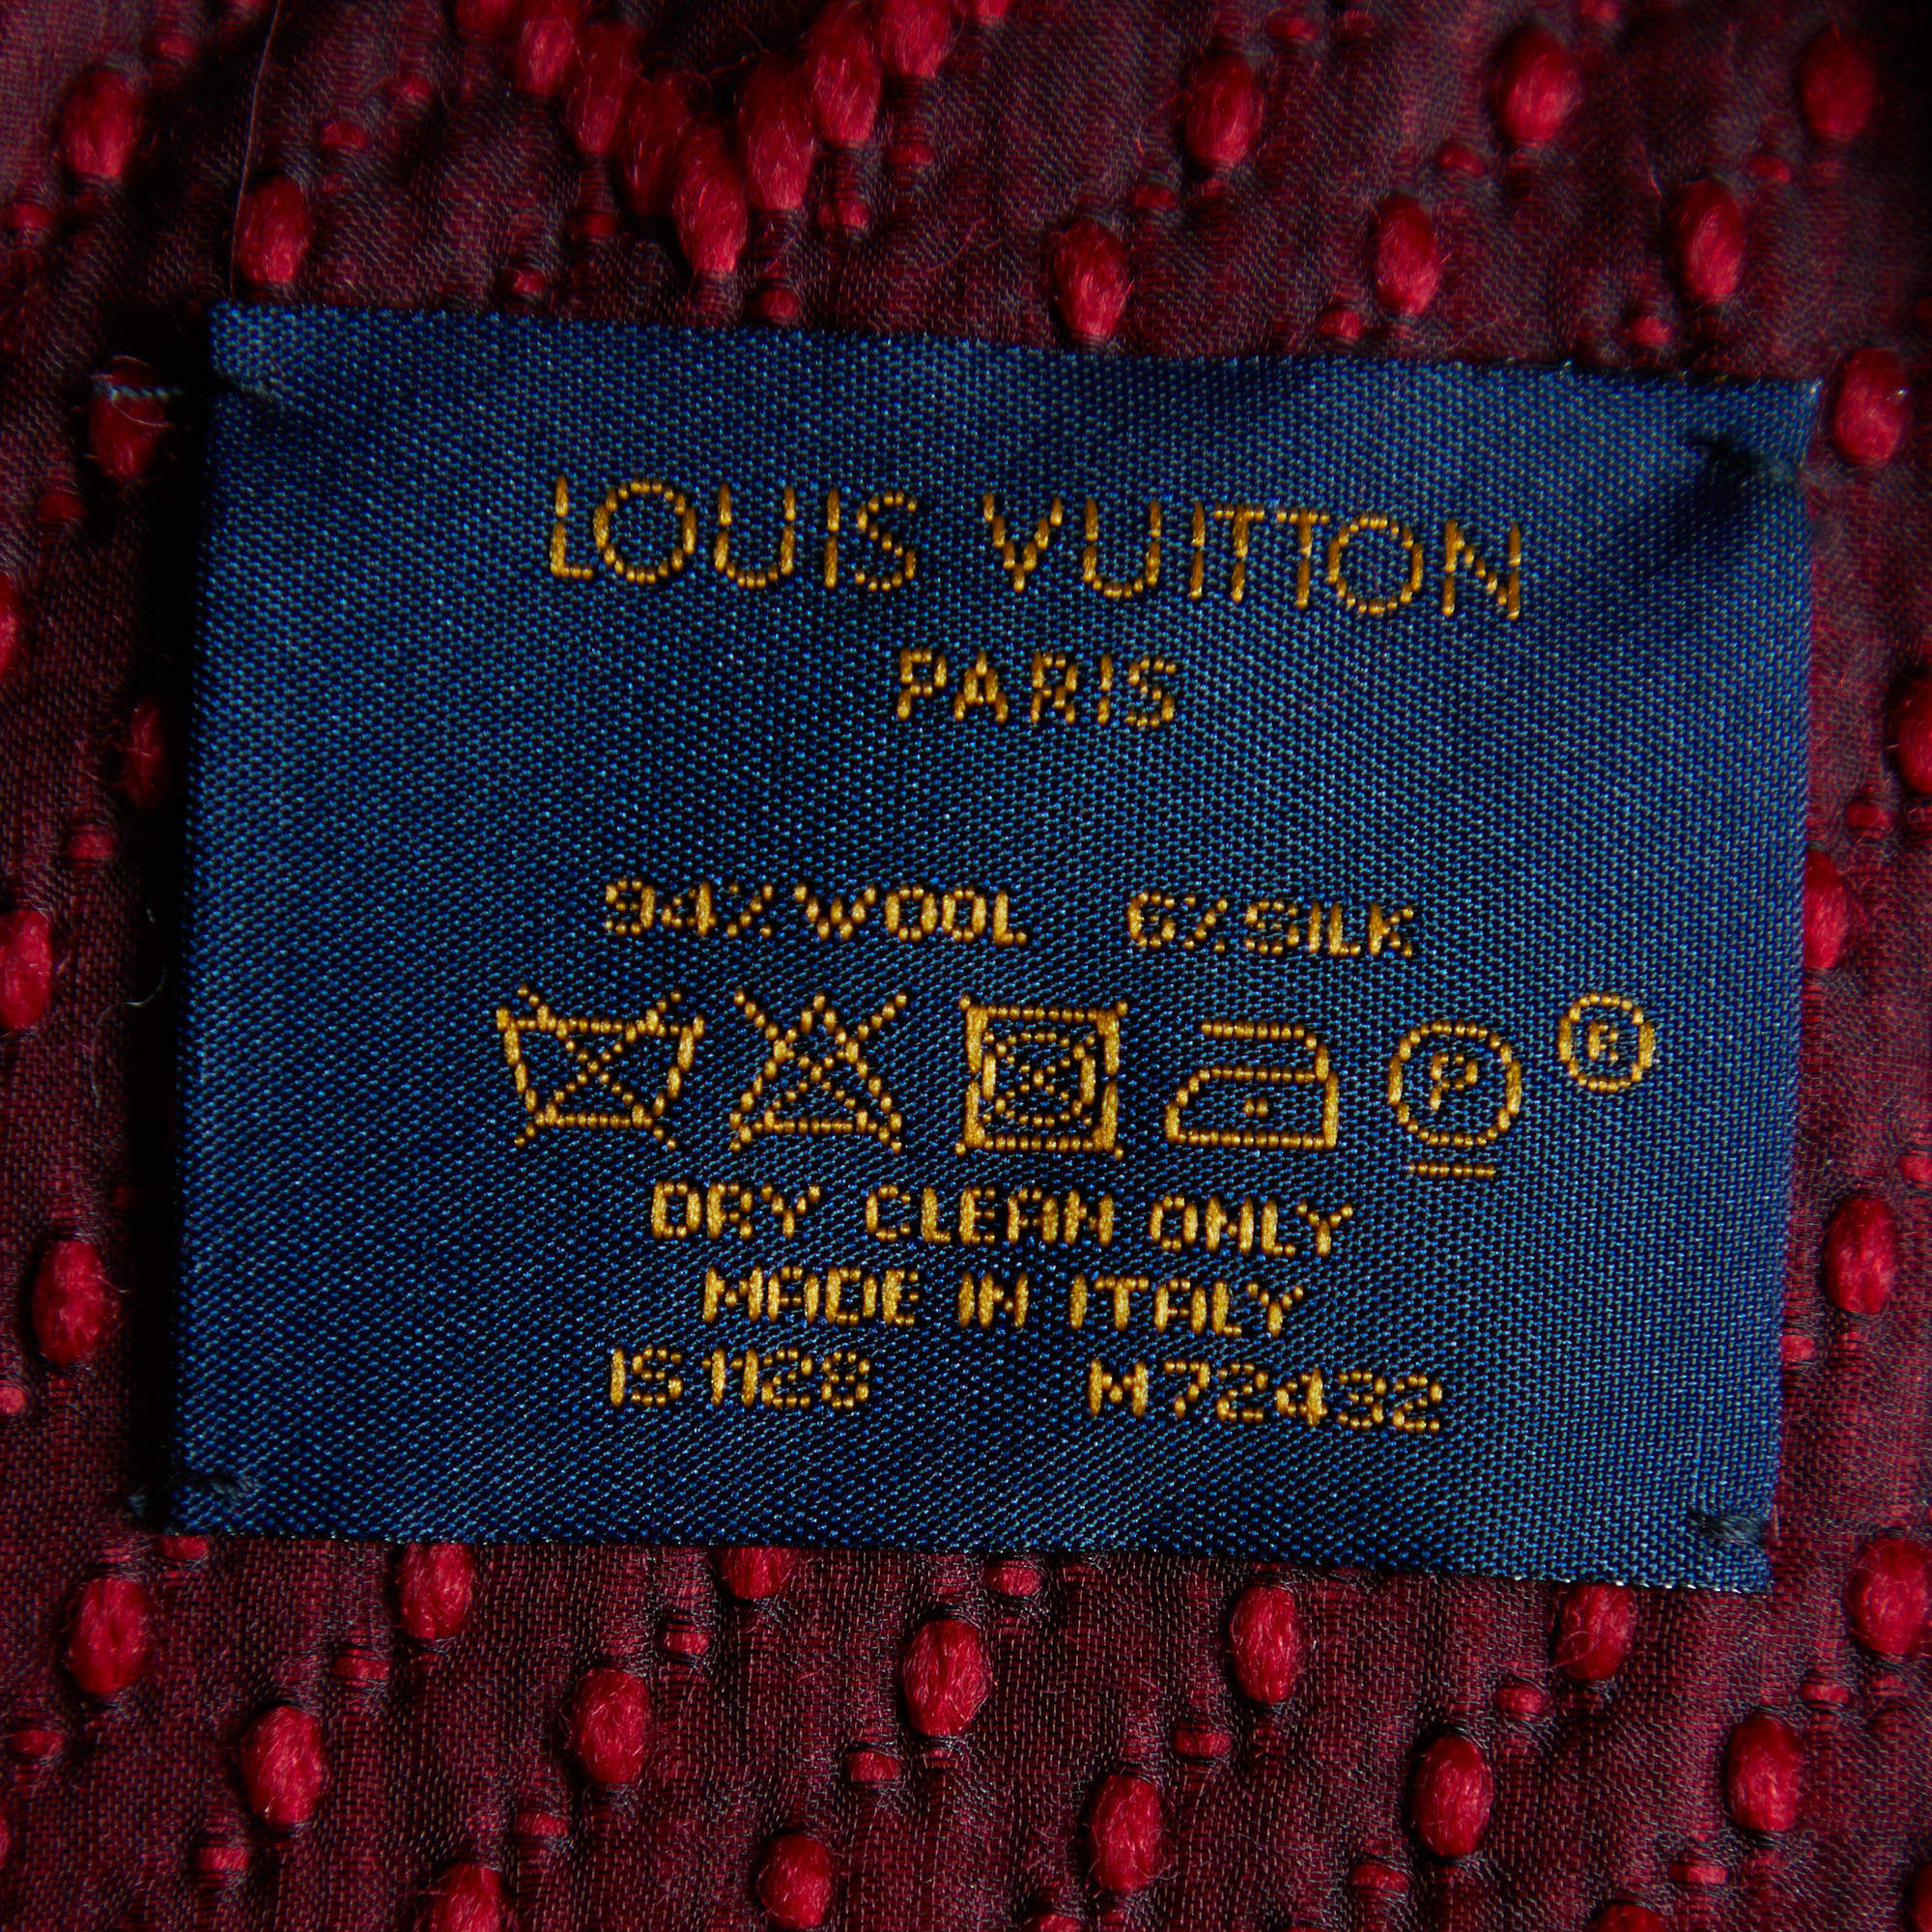 Louis Vuitton Red Wool Cable Knit LV Scarf - Yoogi's Closet